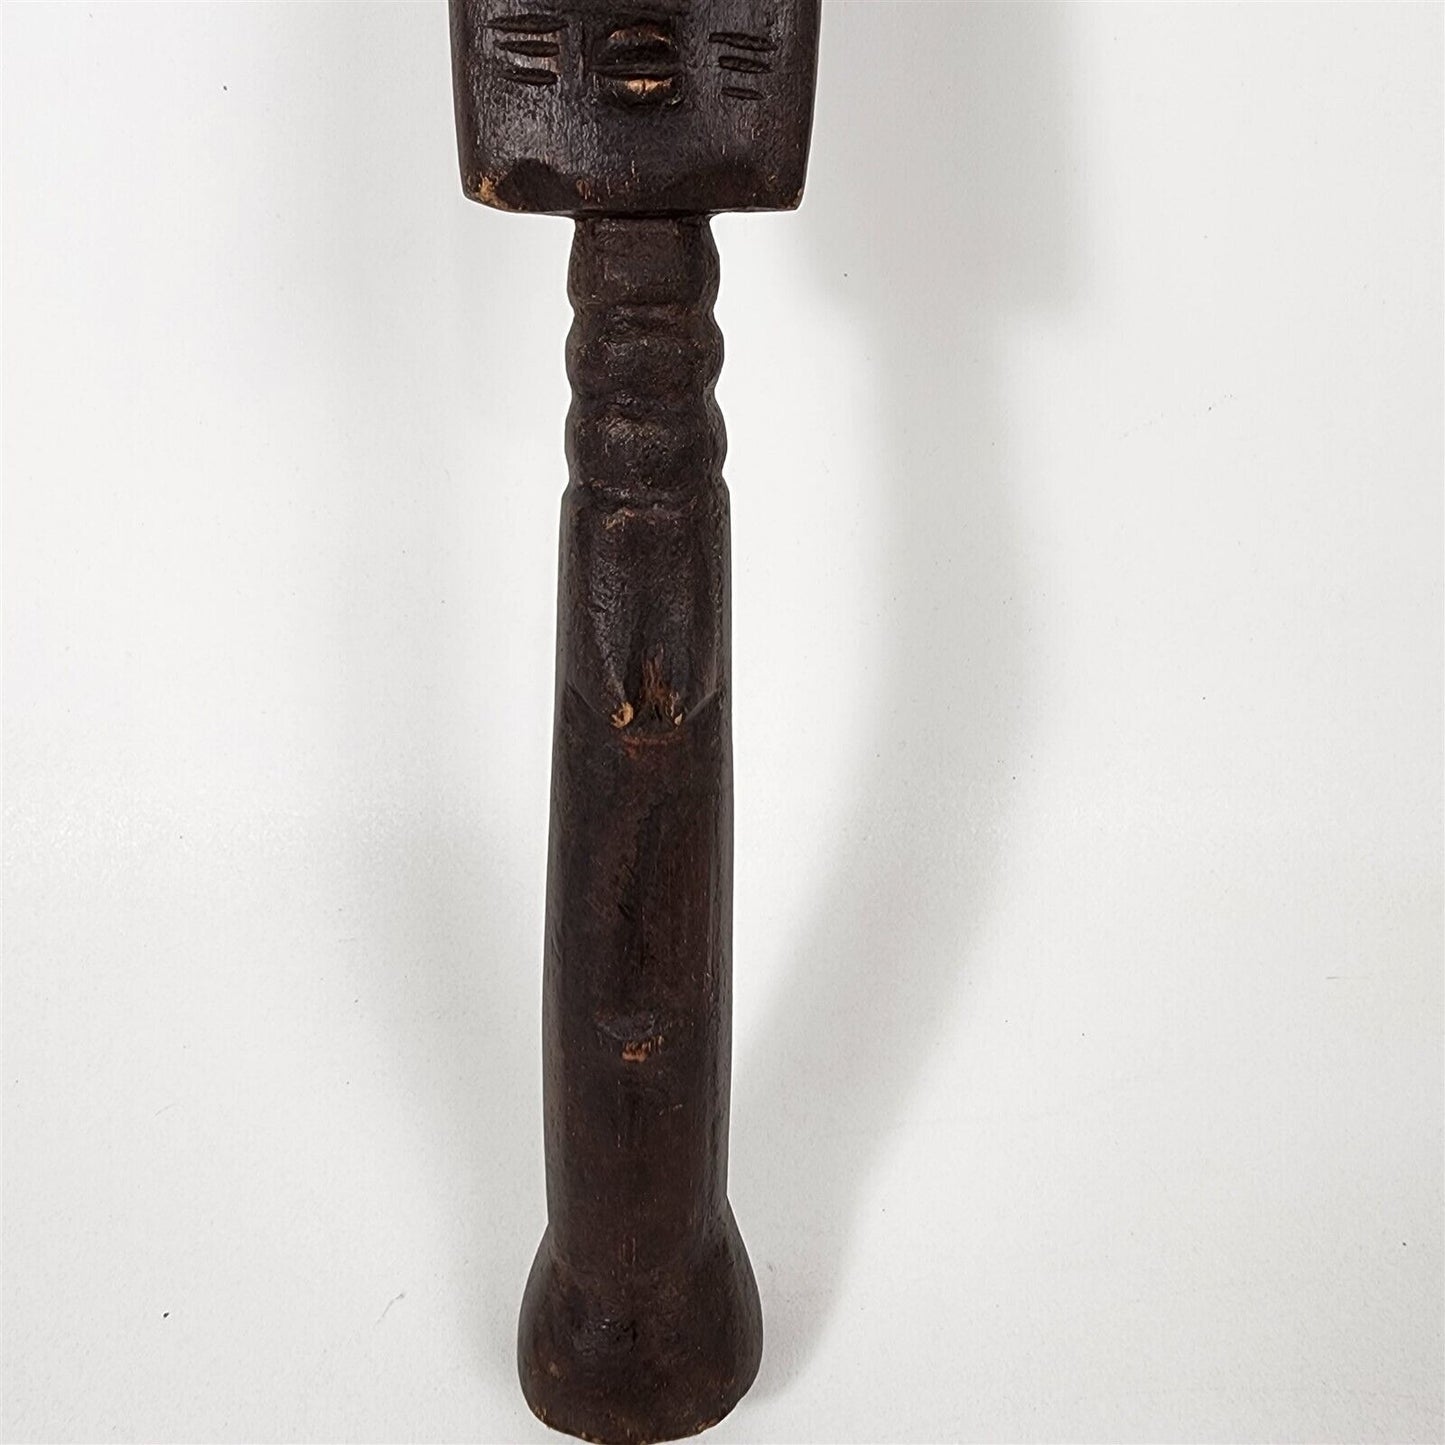 Vintage African Fertility Statue Carved Wood Tribal Art - 16 7/8" tall